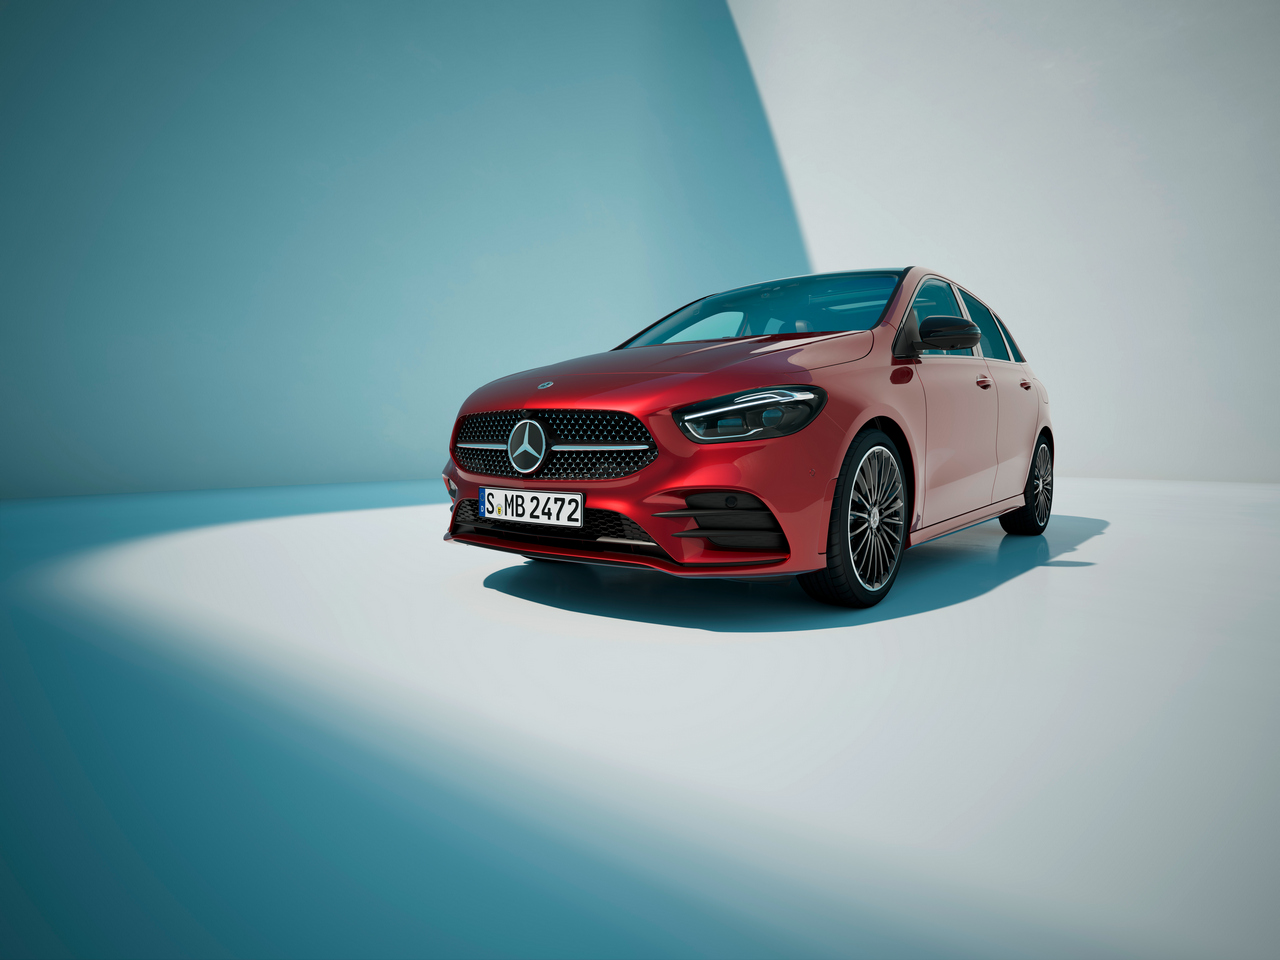 Mercedes-Benz B 250 e, fuel consumption combined, weighted (WLTP) 1,2-0,9 l/100 km, electric energy consumption combined, weighted (WLTP) 17.4-15.4 kWh/100km, CO2 emissions combined, weighted (WLTP) 27-20 g/km; exterior: patagonia red MANUFAKTUR, AMG line<br /> Mercedes-Benz B 250 e, fuel consumption combined, weighted (WLTP) 1,2-0,9 l/100 km, electric energy consumption combined, weighted (WLTP) 17.4-15.4 kWh/100km, CO2 emissions combined, weighted (WLTP) 27-20 g/km; exterior: patagonia red MANUFAKTUR, AMG line;Fuel consumption combined, weighted (WLTP) 1,2-0,9 l/100 km, electric energy consumption combined, weighted (WLTP) 17.4-15.4 kWh/100km, CO2 emissions combined, weighted (WLTP) 27-20 g/km*